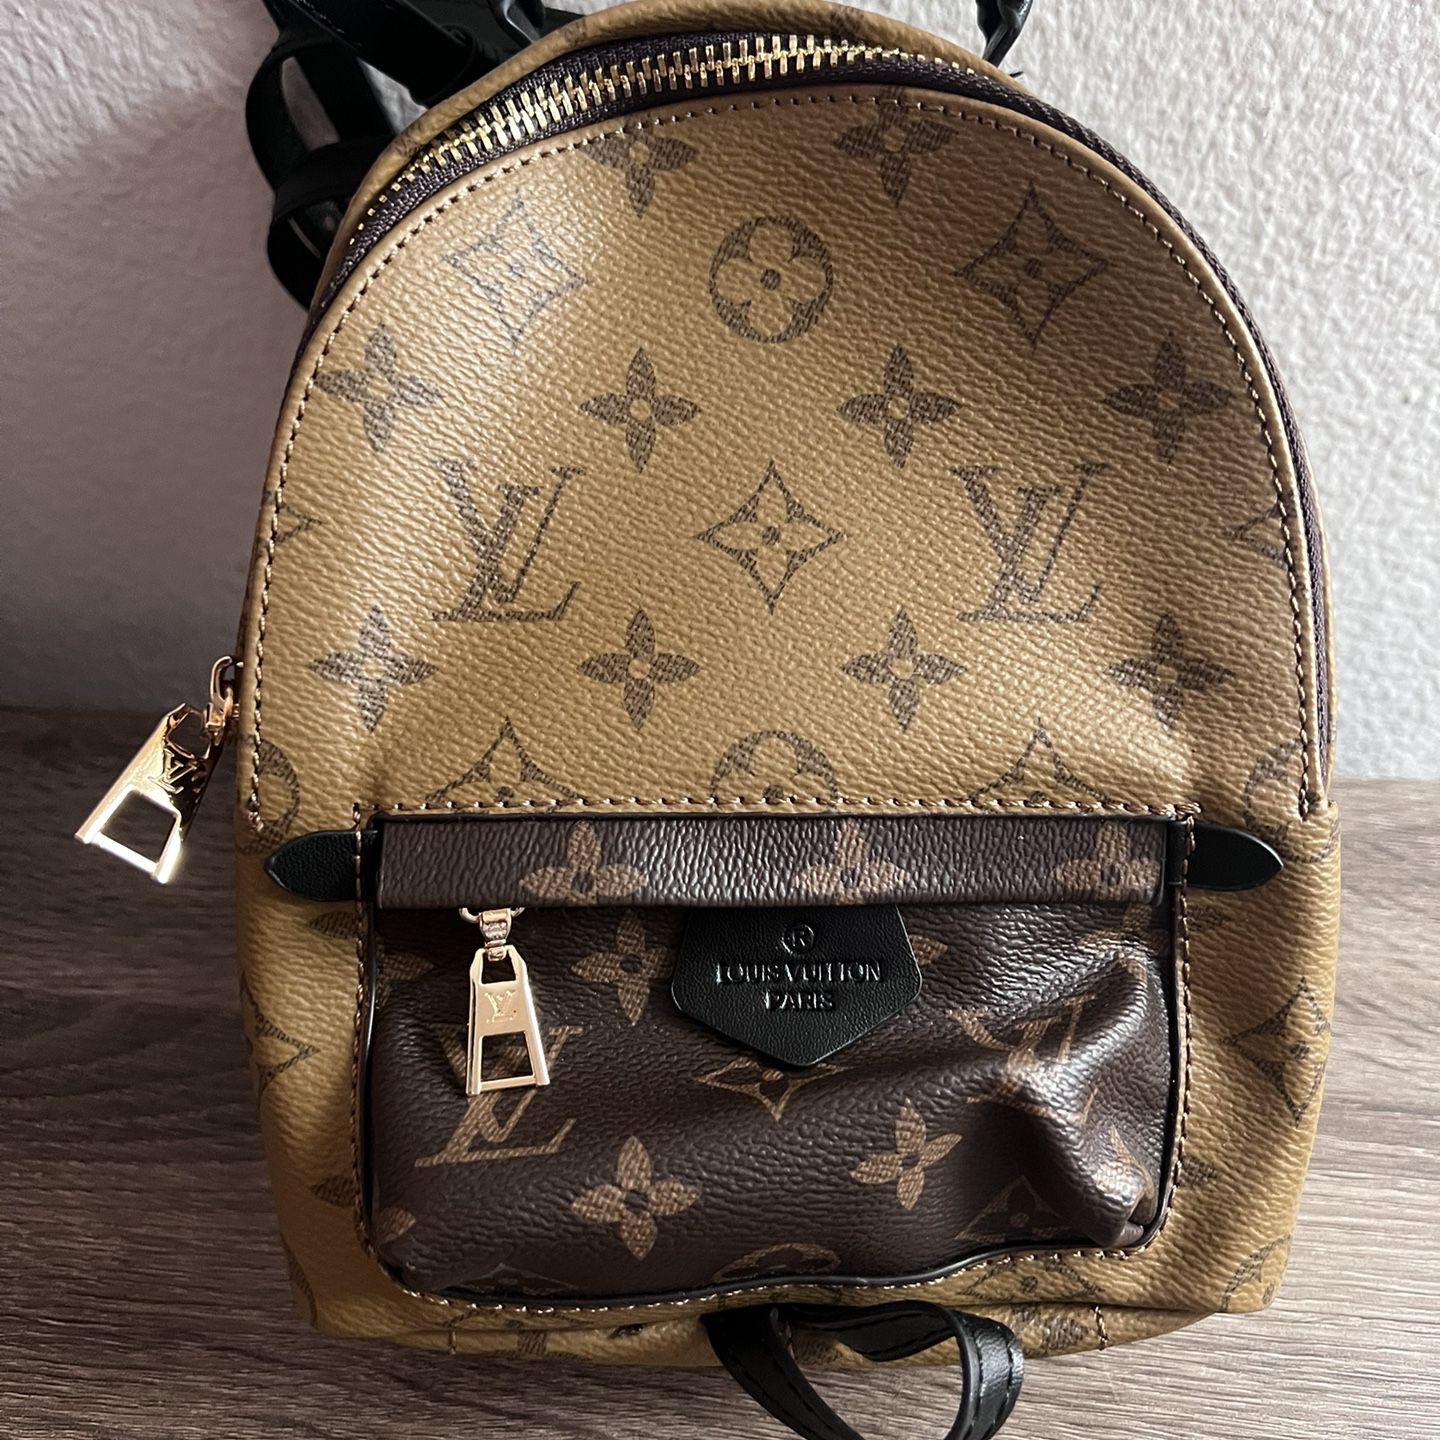 Louis Vuitton Garment Bag for Sale in Palm Springs, CA - OfferUp